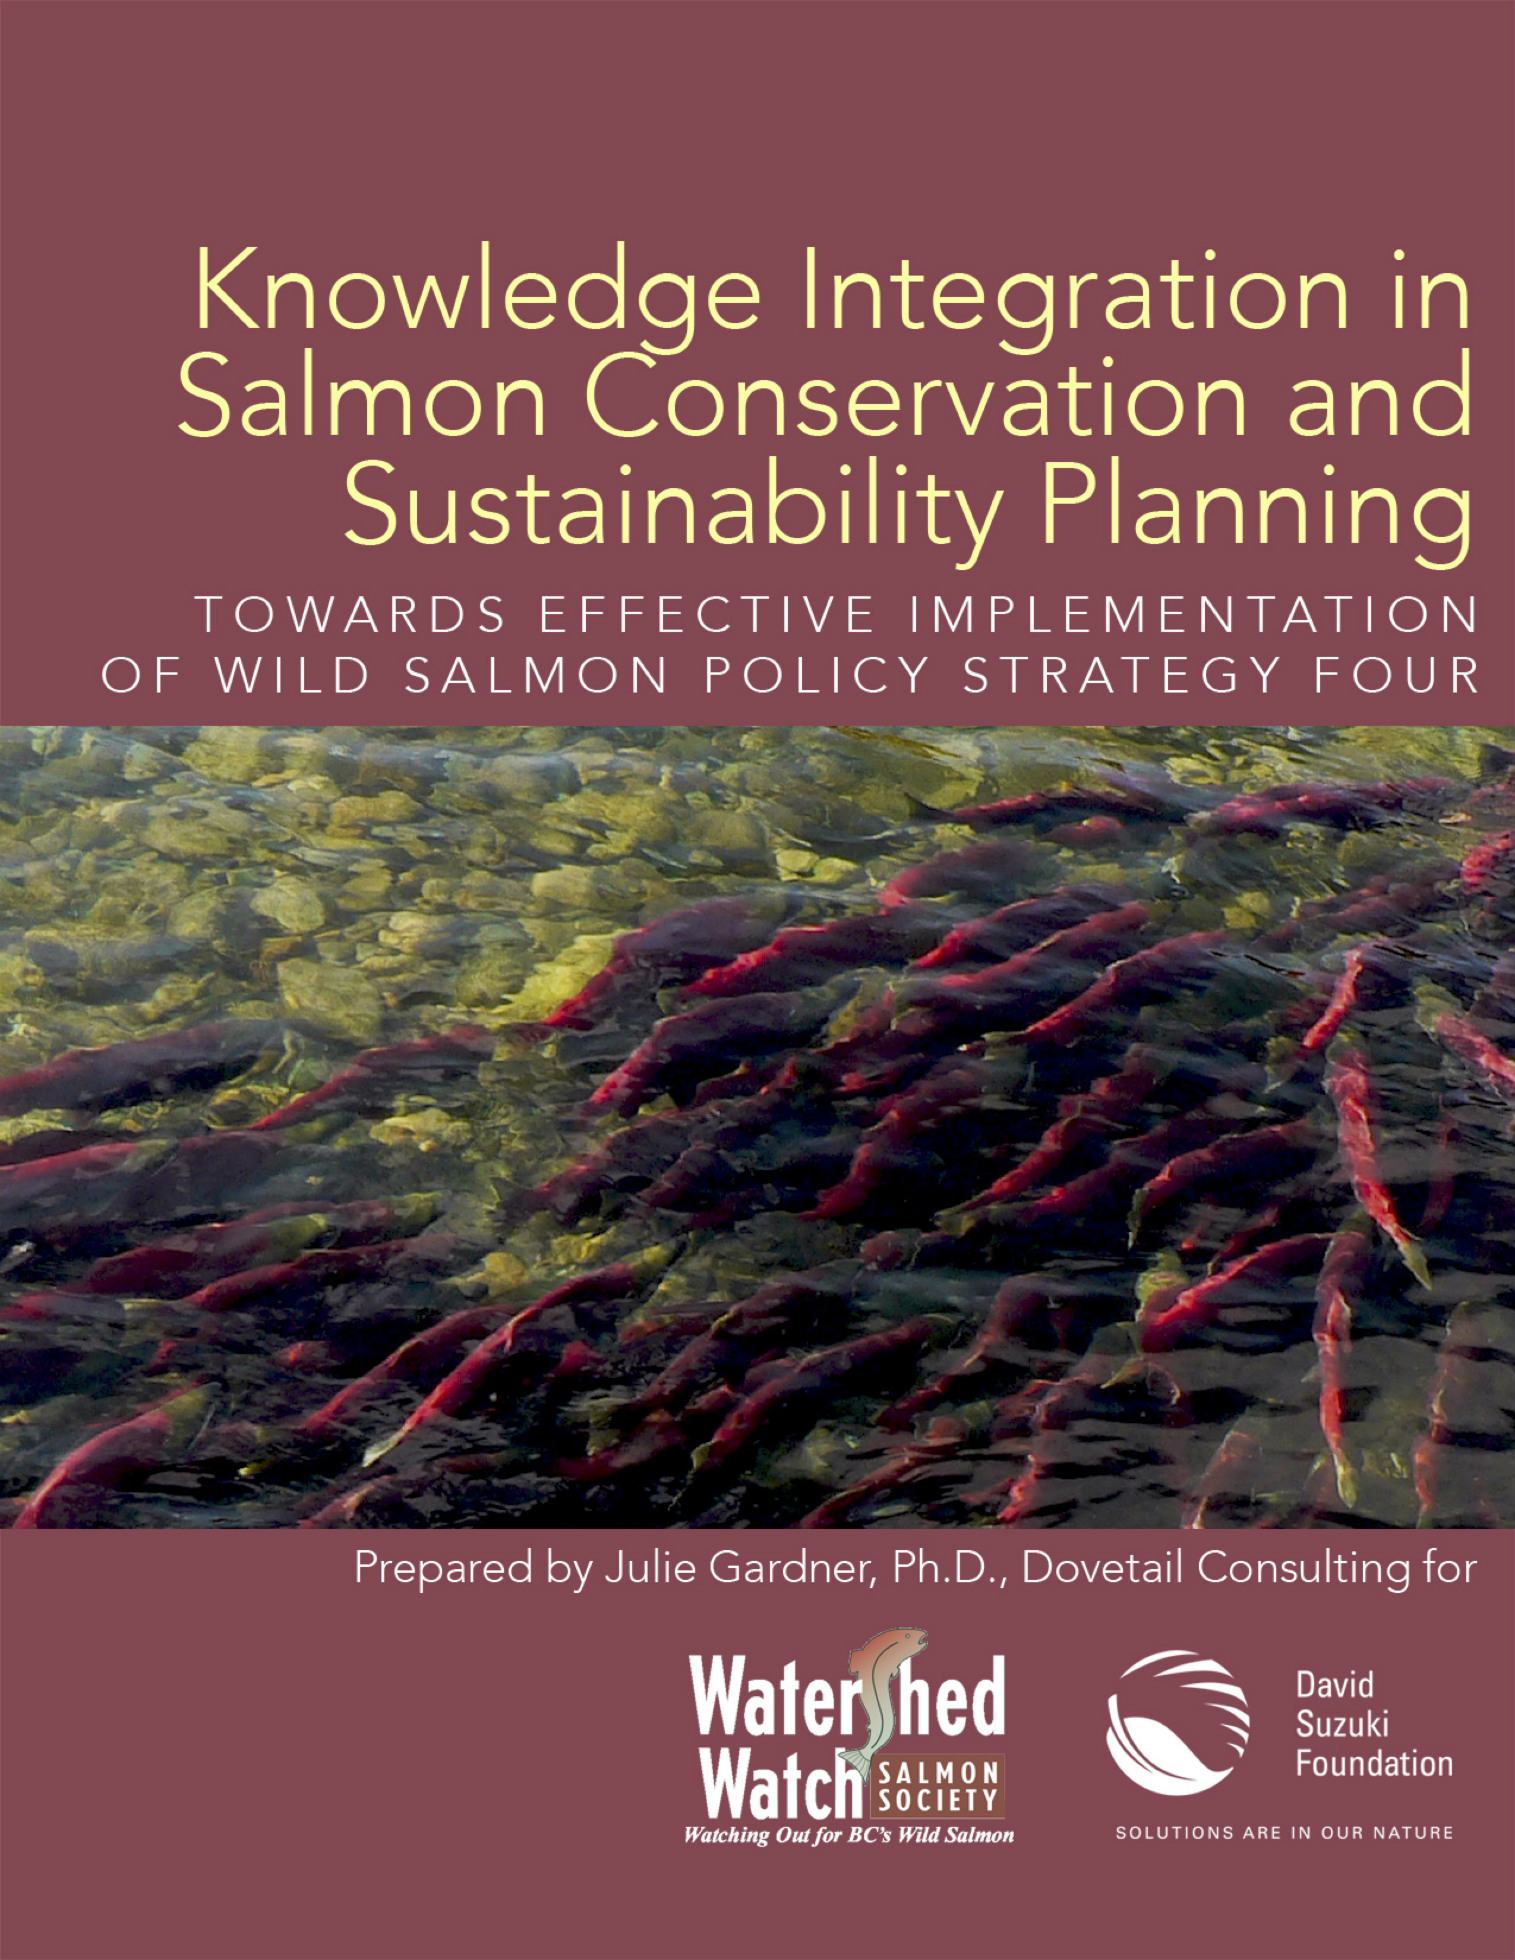 Knowledge Integration in Salmon Conservation and Sustainability Planning: Towards Effective Implementation of Wild Salmon Policy Strategy Four